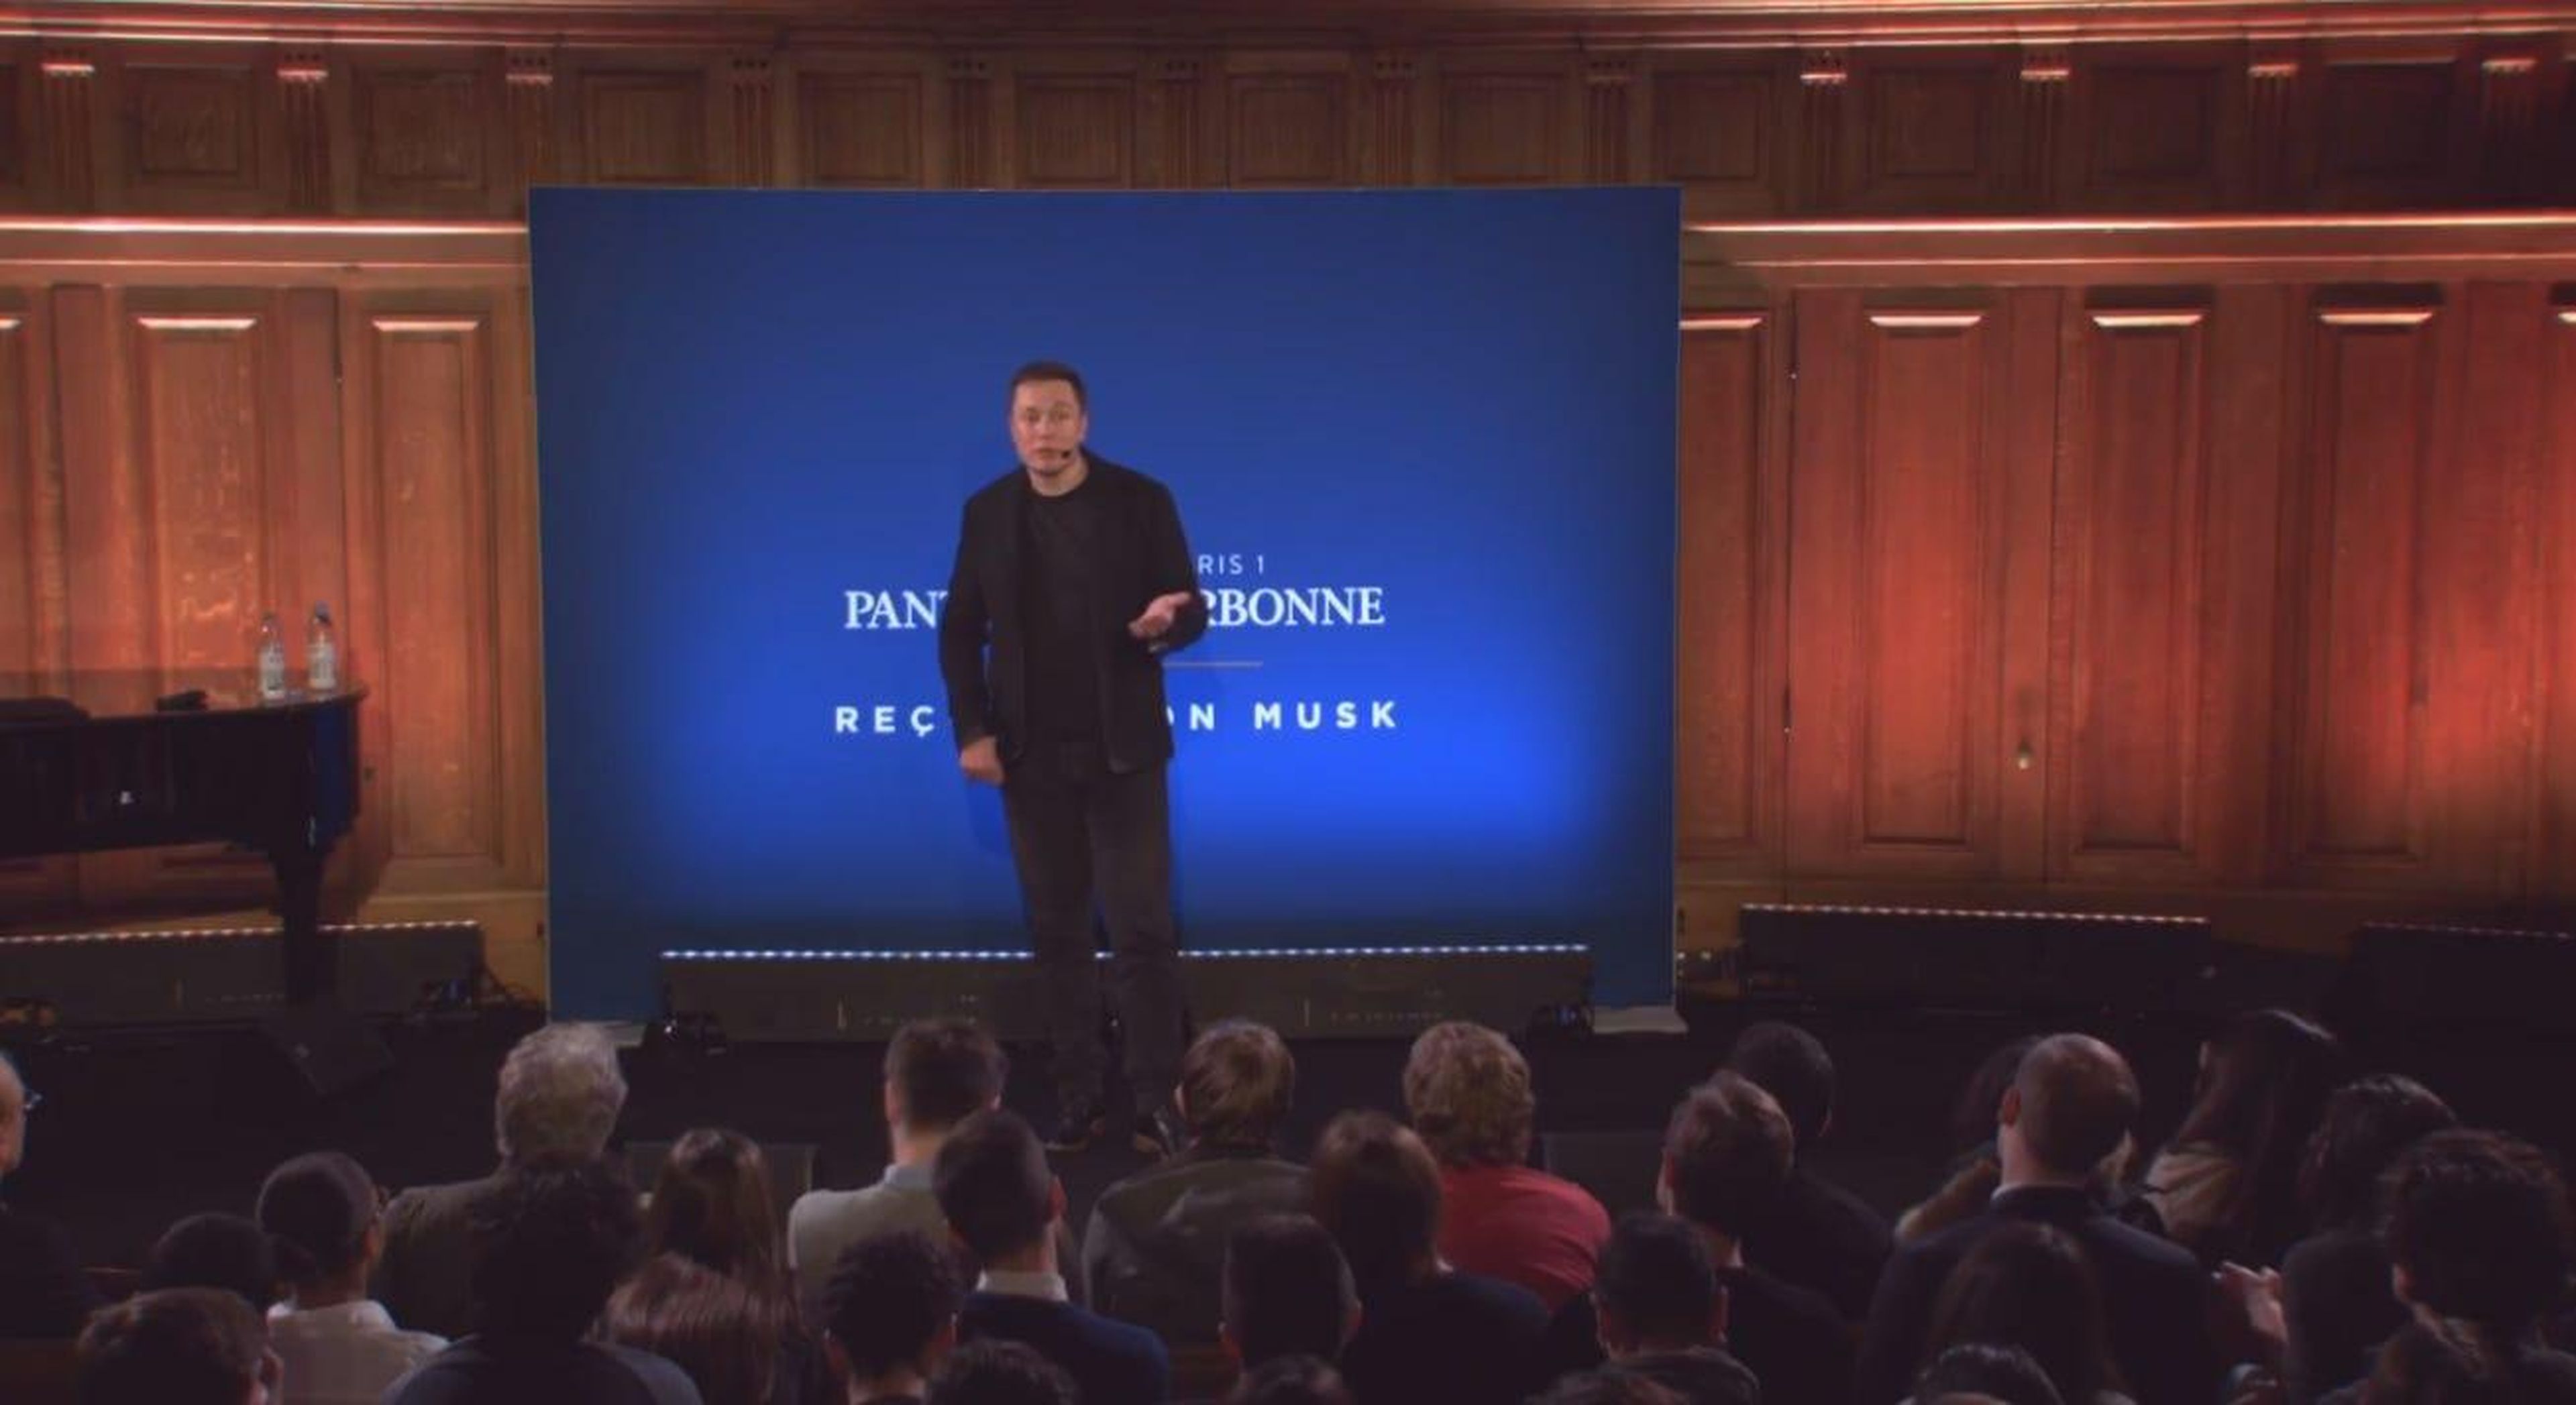 13. Elon Musk's speech in Paris calling for a carbon tax. In late 2015, Musk gave an important speech at the Sorbonne in Paris, demanding a price on pollution. "We have to fix the unpriced externality," he told the audience.